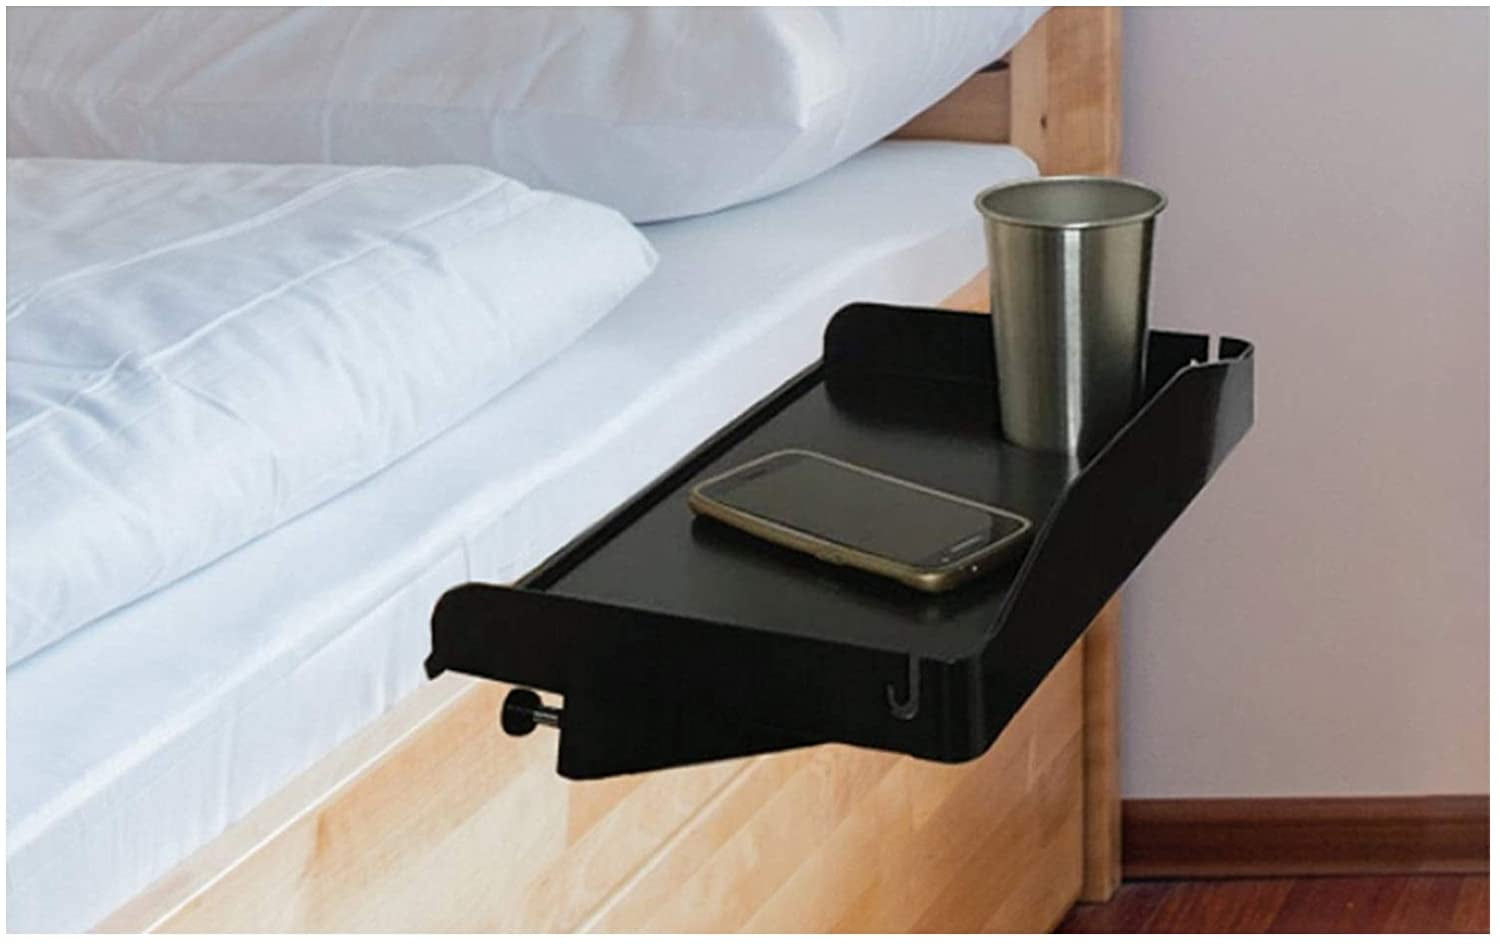 Black Bedside Shelf For Bed Clip On, Can You Paint Over A Bunk Bedside Table